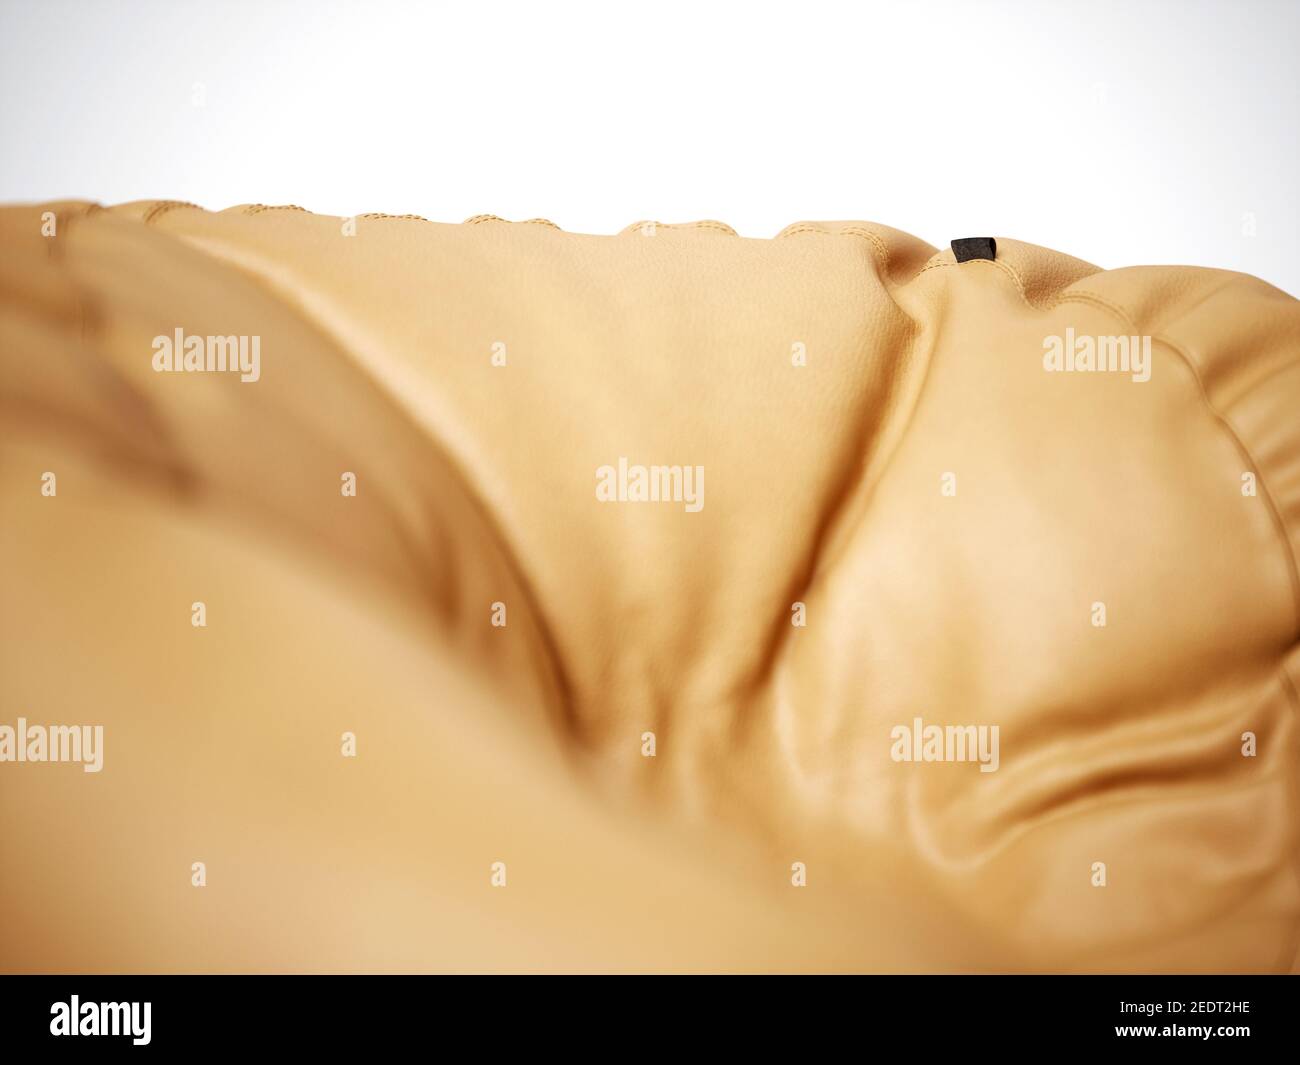 Brown soft leather beanbag closeup isolated on white background. 3d rendering illustration Stock Photo